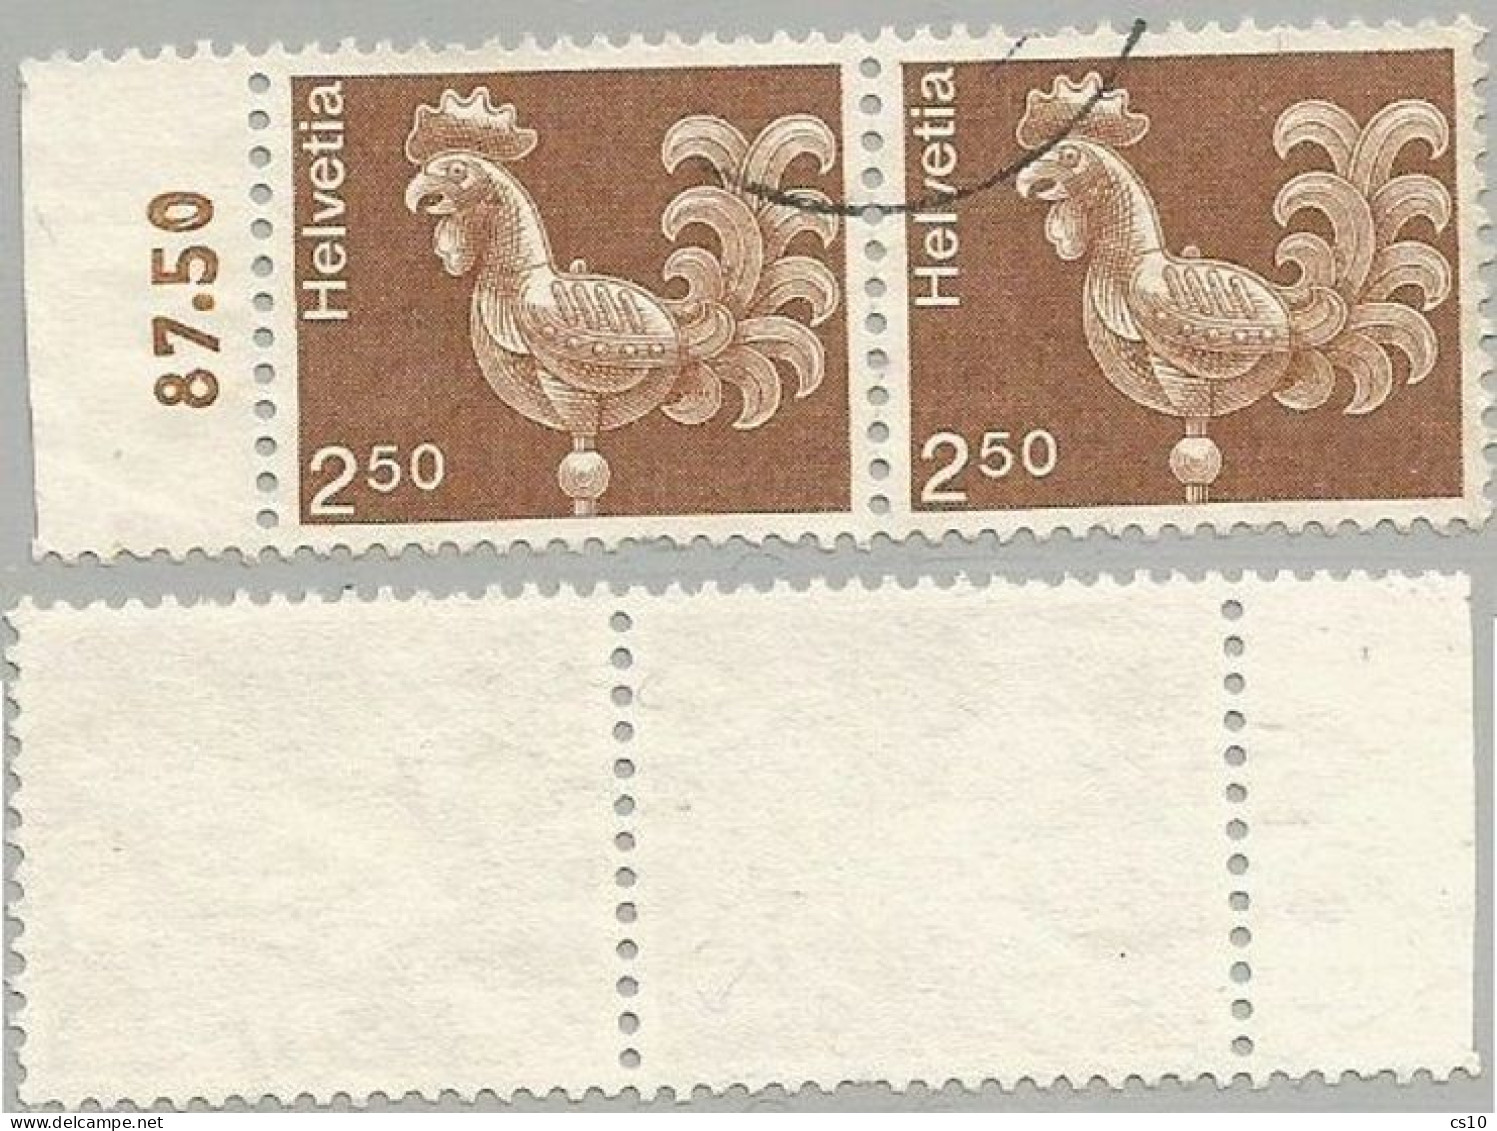 Suisse 1975 Artworks Wheatercock FS.2,50 - Scarce Variety NON FLUO PAPER - #2 Pcs In Horiz. Pair With Sheet Margin - Errores & Curiosidades